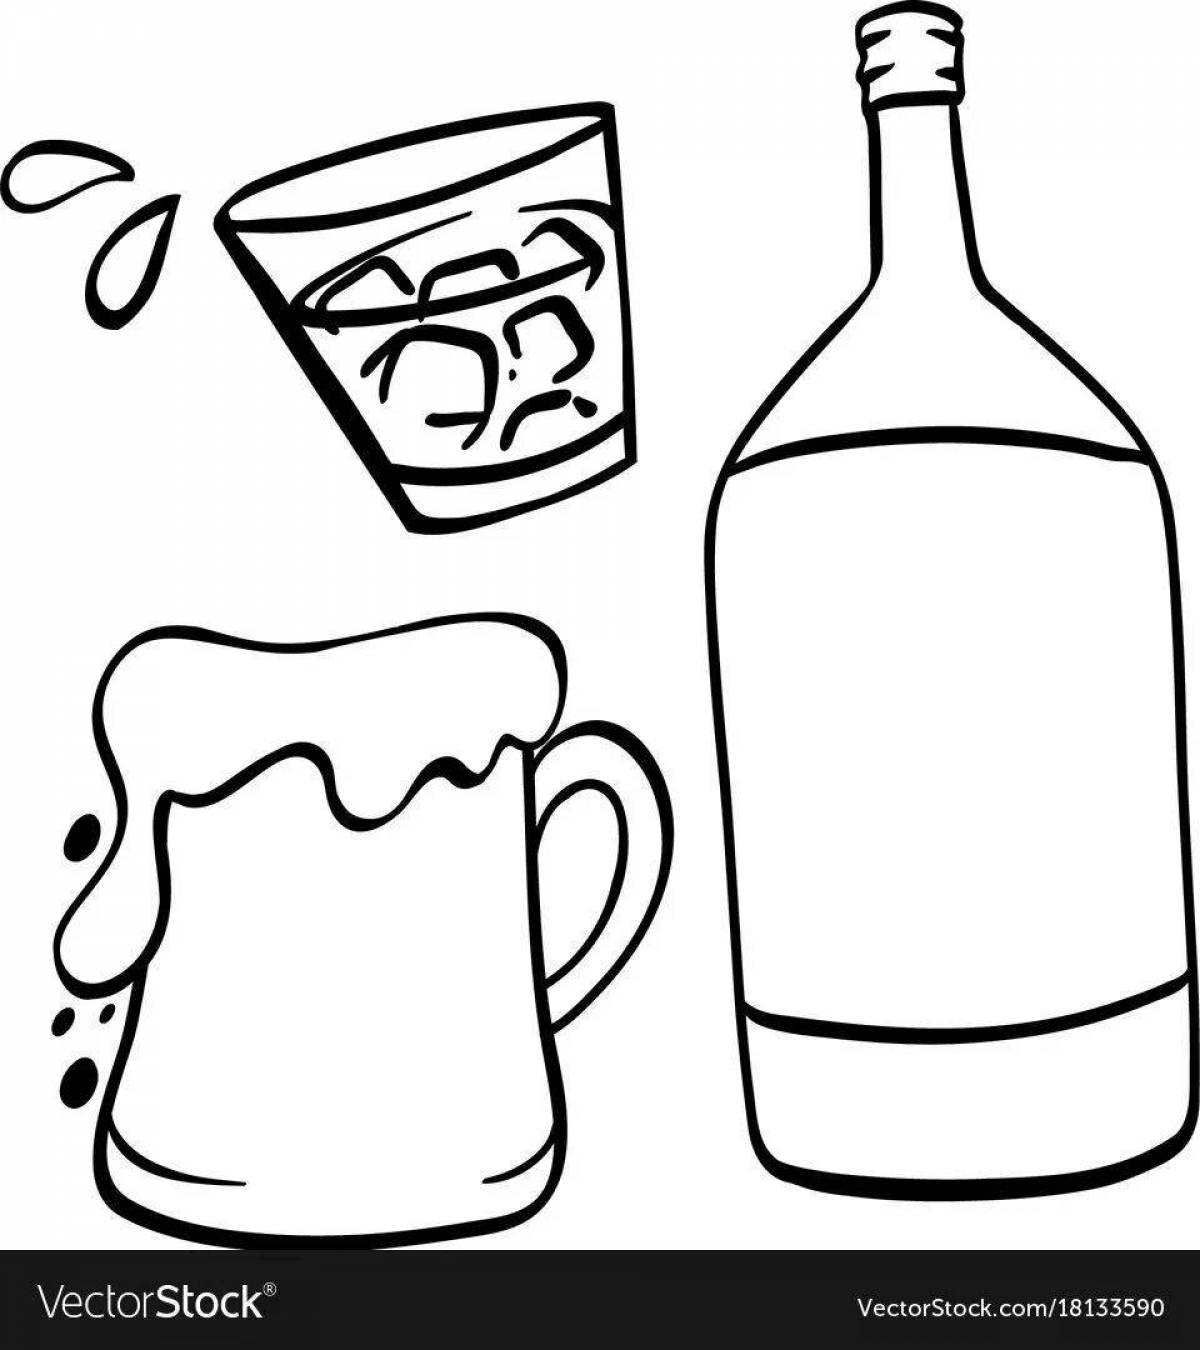 Live alcohol coloring page